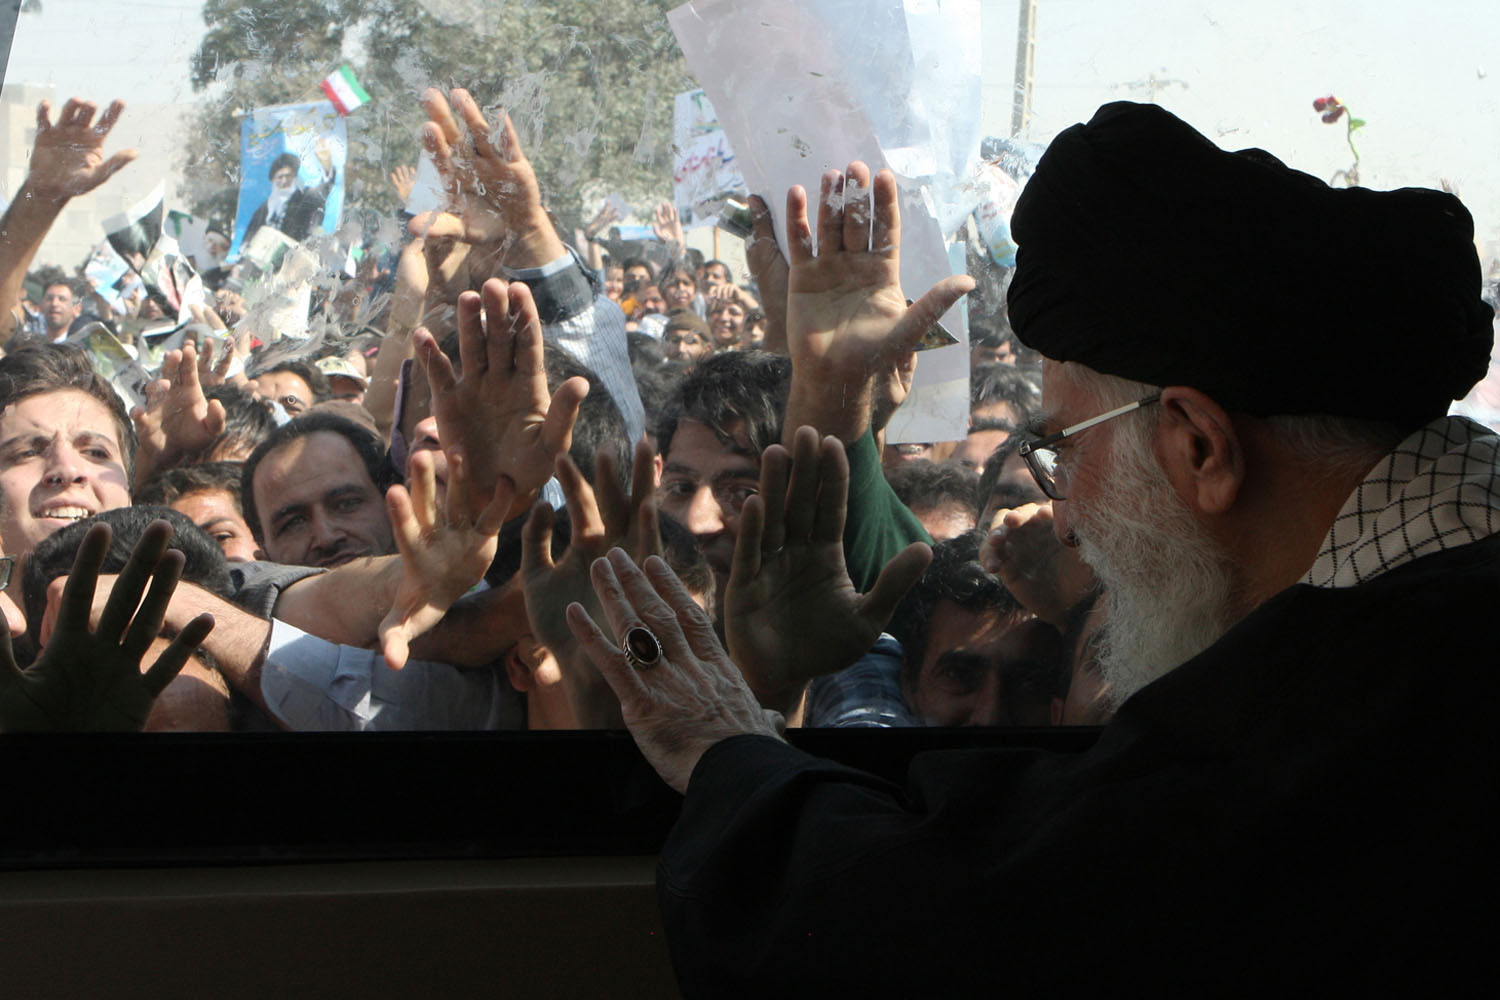 Oct.10, 2012. Iran's Supreme Leader Ayatollah Ali Khamenei's car is surrounded by well-wishers upon his arrival to the northeastern city of Bojnourd, Iran.